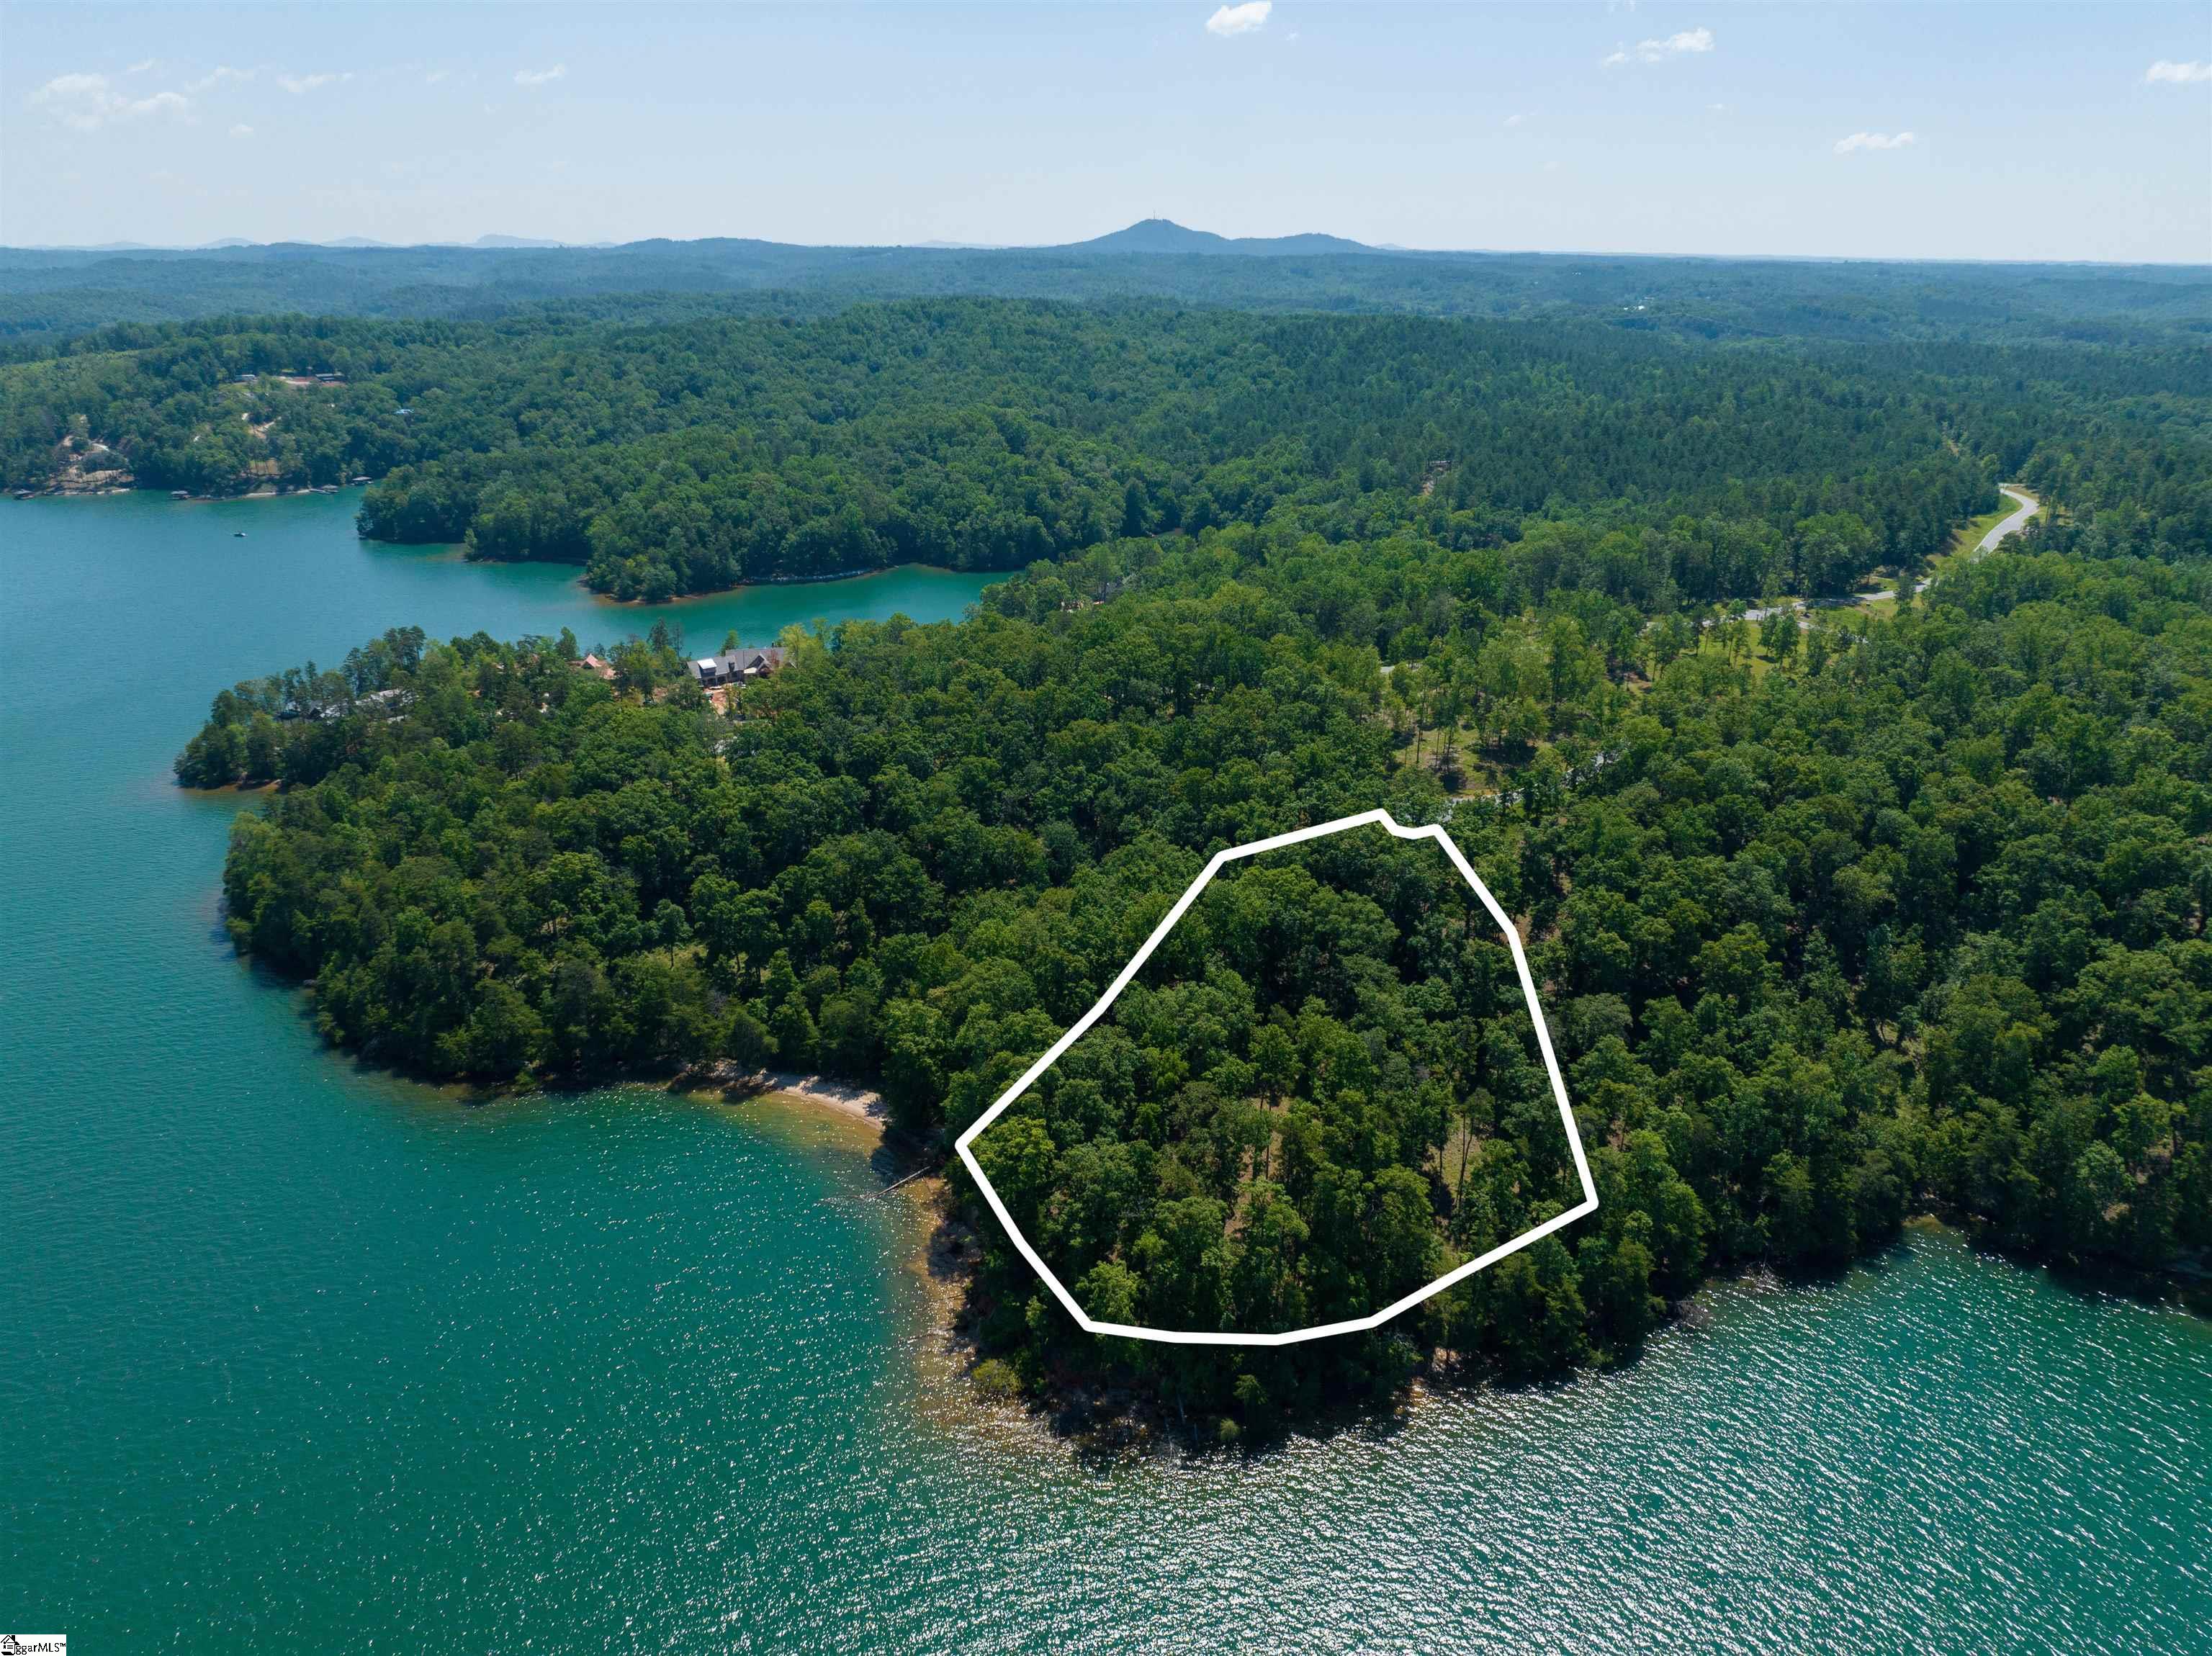 ONCE IN A LIFETIME OPPORTUNITY to secure a slice of paradise on LAKE KEOWEE, one of the most sought-after locations in the Southeast! Whether you are ready to build now or in the future, 233 Sandy Hollow Ct is the ultimate canvas for your lakefront masterpiece. If you are familiar with our Lake Keowee region, you know home sites of this excellence are the most difficult to find! Experience the ultimate luxury lifestyle in the highly sought-after Cliffs at Keowee Springs / The Landing. This spectacular waterfront lot offers stunning long water, mountain, and sunset views. With over 425 feet of pristine shoreline and 2.3 acres, this point lot situated on a private cul-de-sac is a rare find and provides the perfect backdrop for your private custom dream home. An 8,000 square foot estate home plan, specifically designed for this lot by Gabriel Builders, to be included with property. Gabriel Builders is a premier builder of estate homes in Lake Keowee’s most exclusive communities. Alternately, bring your vision to life on this private, stunning lot with your own architect and builder. The Cliffs at Keowee Springs offers unparalleled amenities including golf, tennis, pickleball, pool, the Beach Club, the Sportsman Trail, and the soon-to-be completed new Lakeclub. This multi-purpose complex on the lake will include two swimming pools, a restaurant, and a wellness center. Located on the east side of Lake Keowee, this property provides easy access to Clemson and Greenville for dining, shopping, theater, sporting events, and the GSP International airport. As a member of a Cliffs community, you will enjoy access to all the extraordinary and unique amenities in each of the seven regional Cliffs communities, allowing you to indulge in all the best that The Cliffs and Lake Keowee has to offer. An amazing home site offering for the most discerning buyer. Permitted for Dock. Custom dock design by Kroeger Marine to be made available. Complete home plans available to view for serious inquires only.